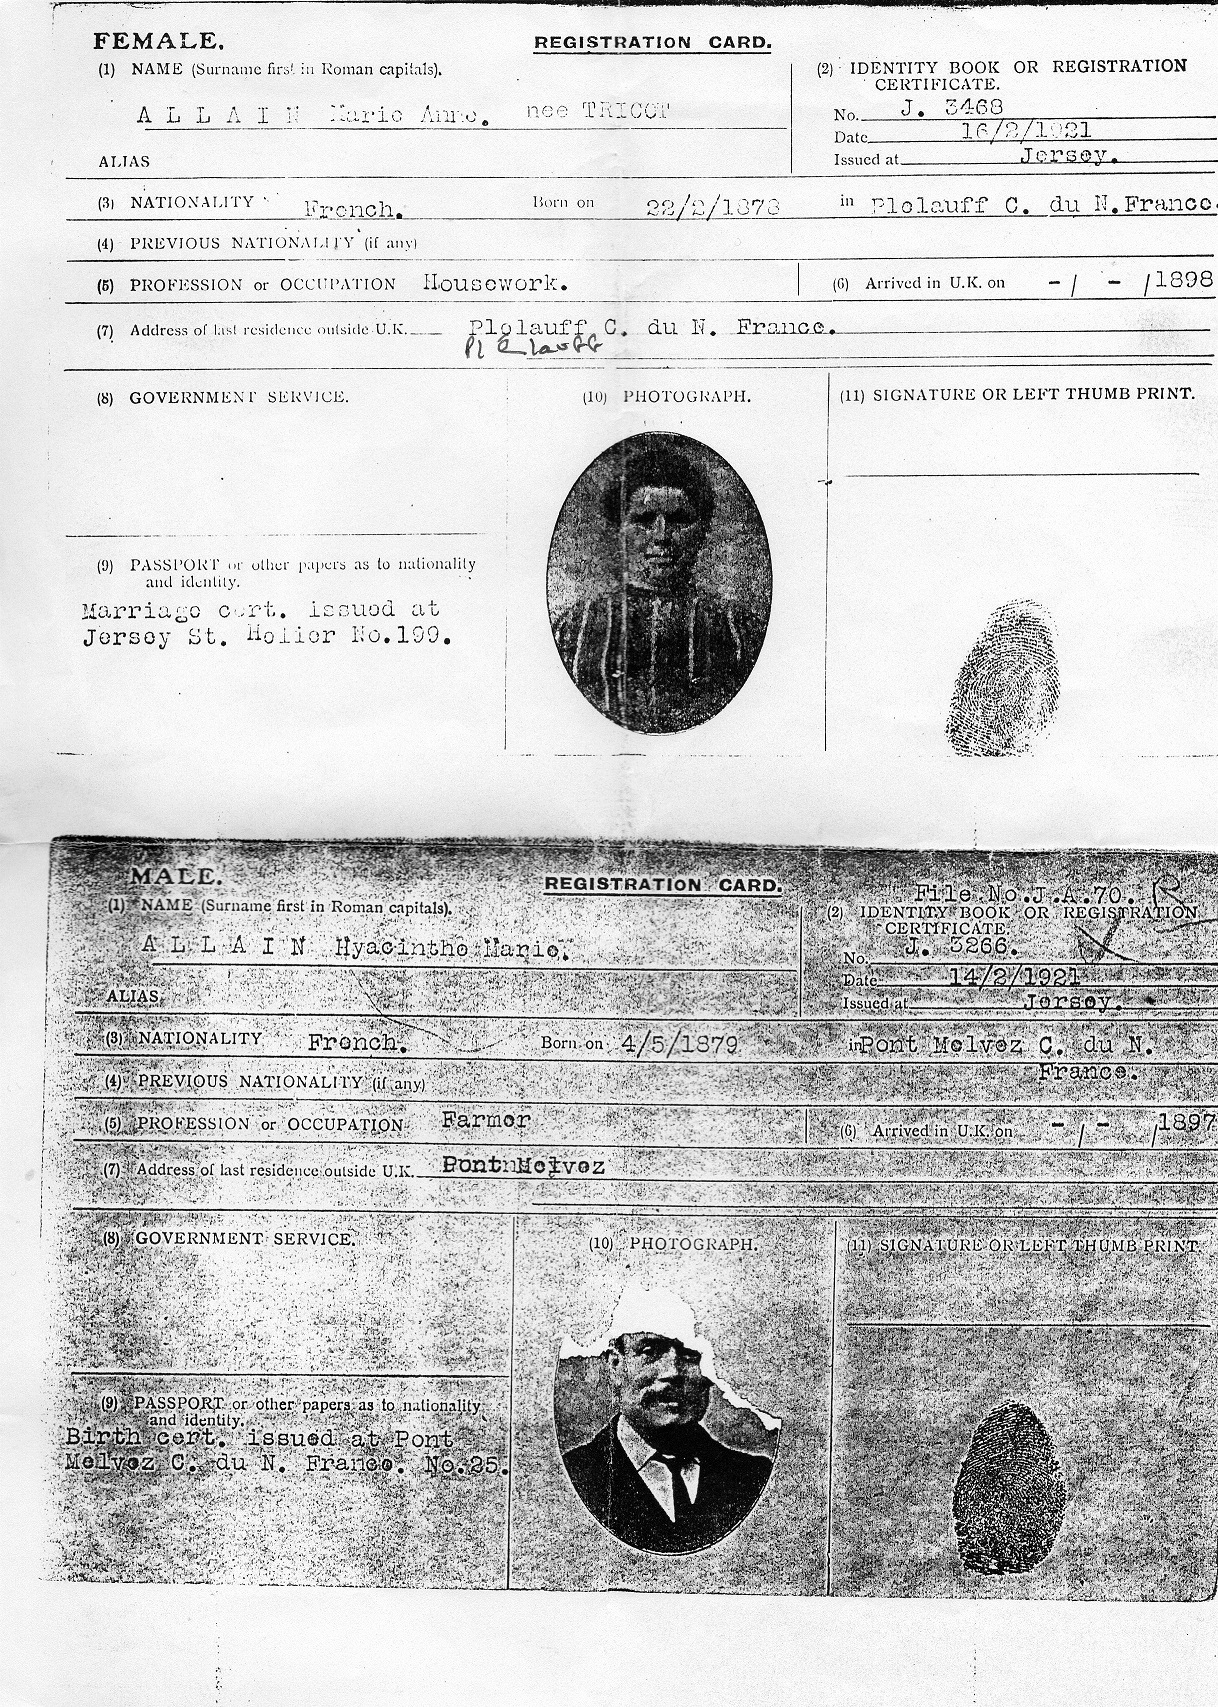 Allain Jersey immigration documents